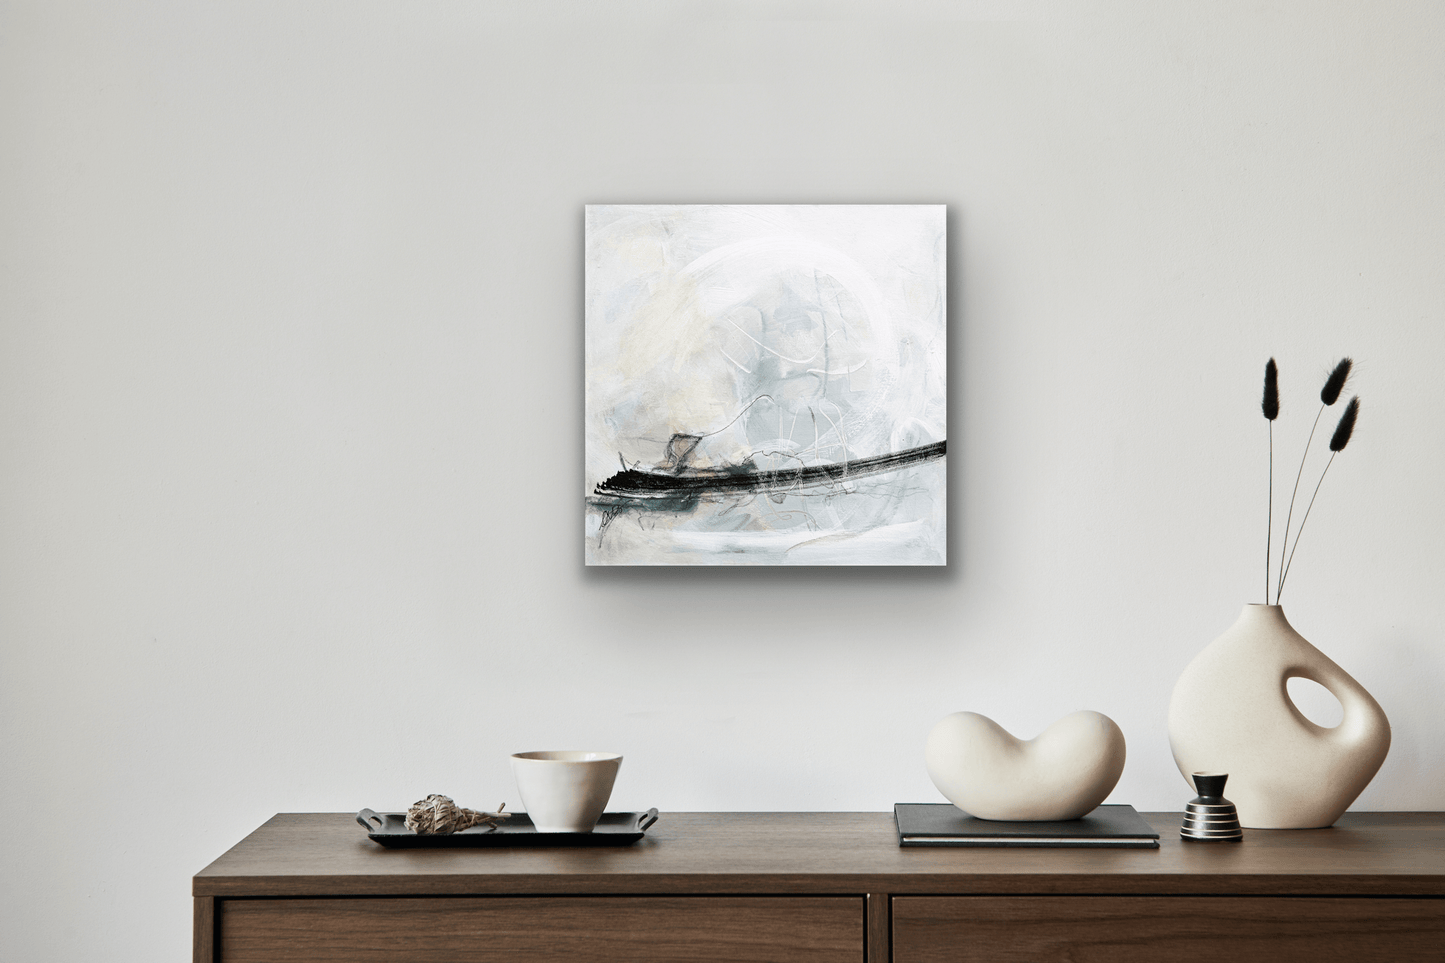 "Pause.Calm" original masterpiece is smaller in size at 18 in by 18 in.